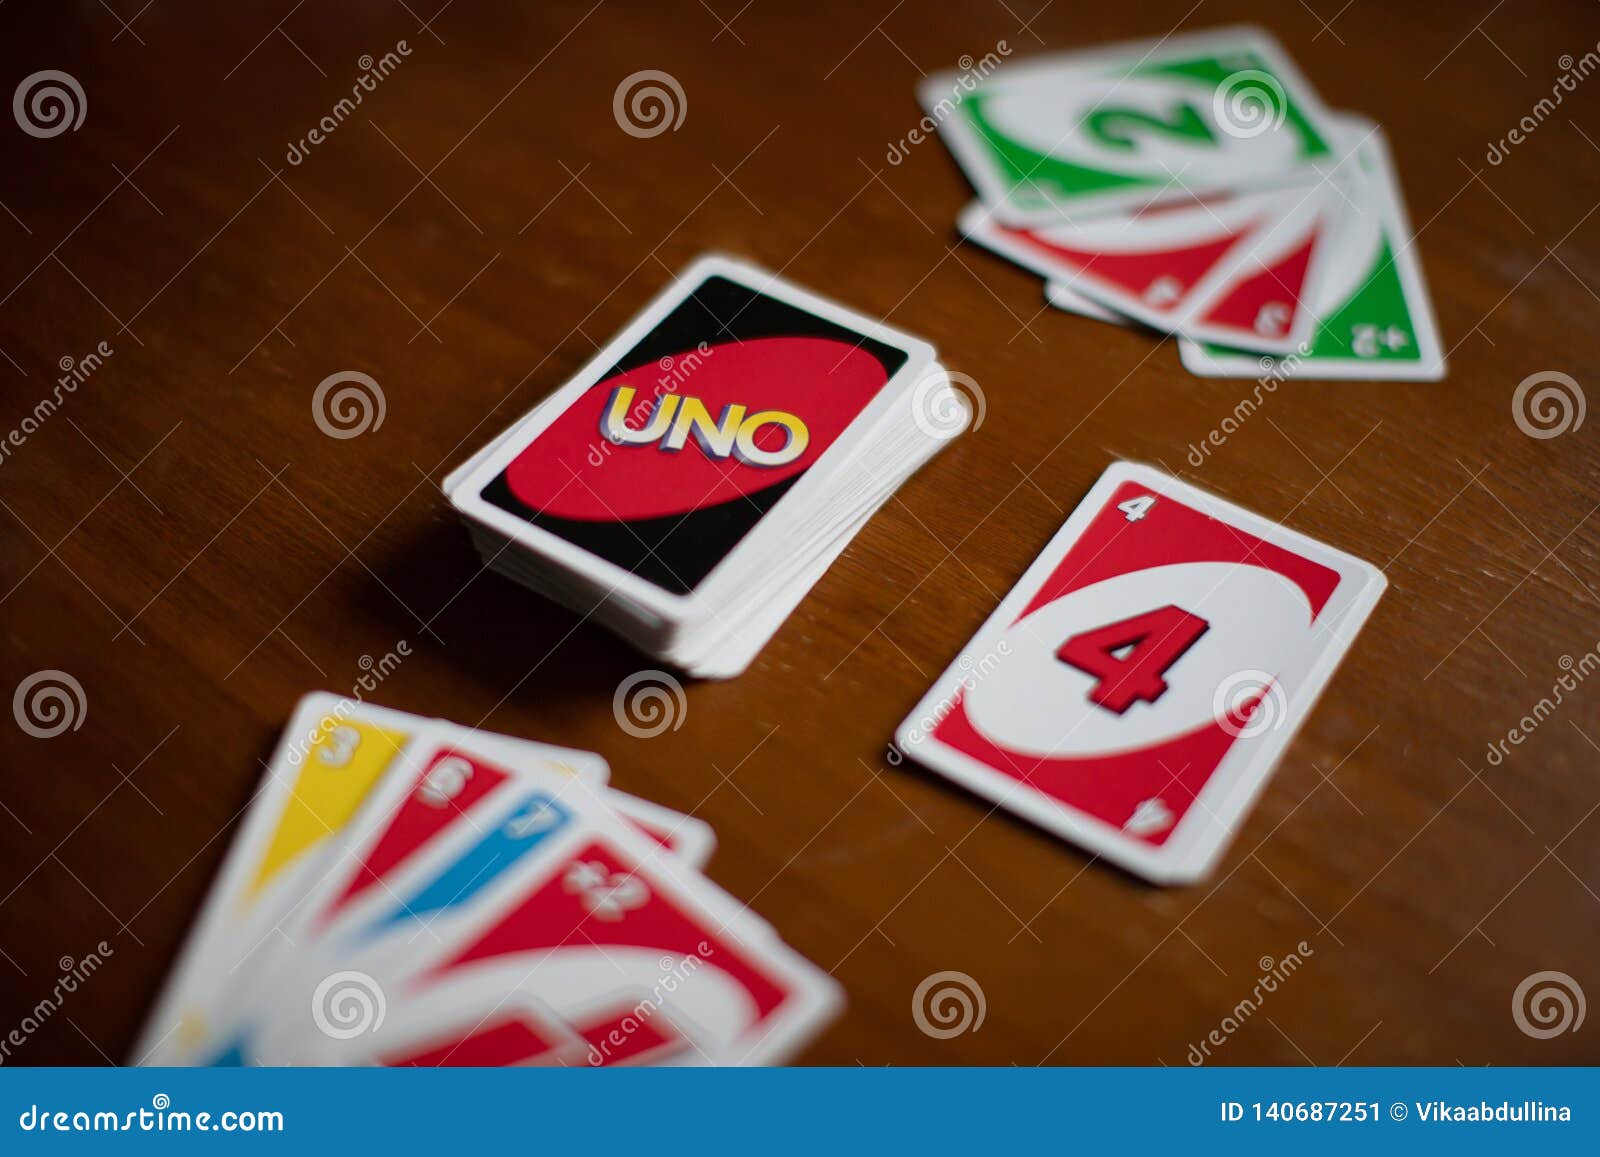 Deck Of Uno Game Cards Scattered All Over On A Table. American Card Game. Editorial Photo ...